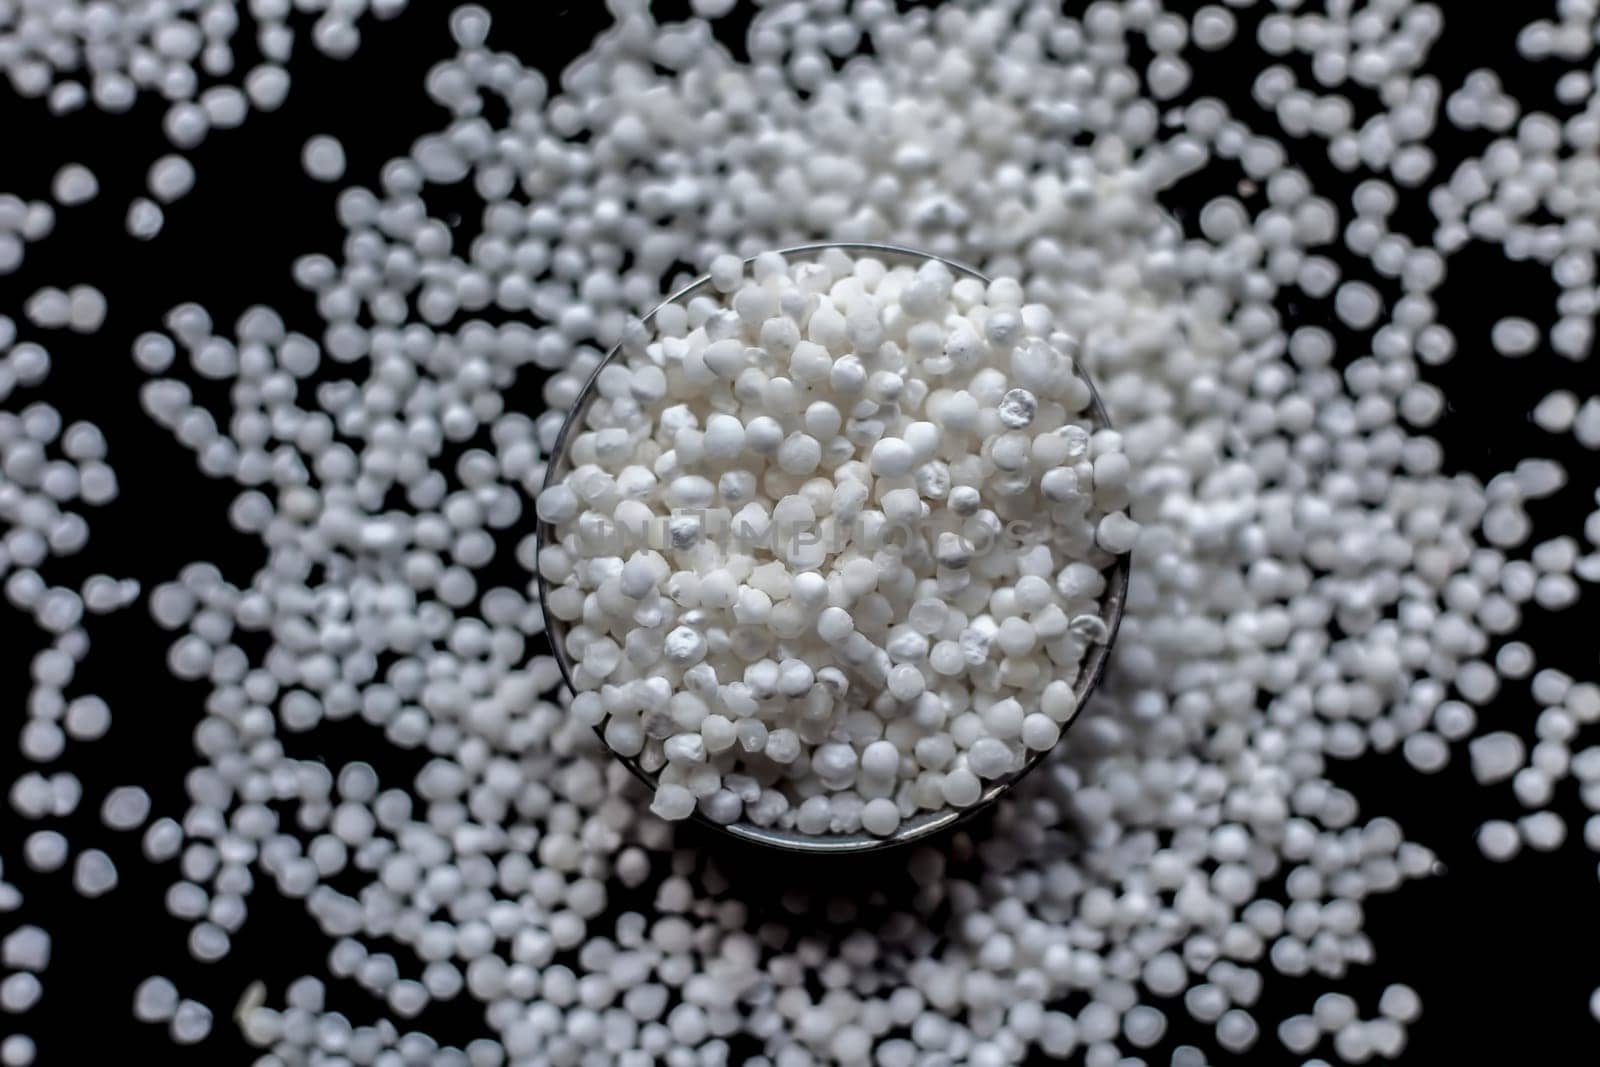 Close-up shot of raw sago pearls or tapioca pearls in a glass plate on a black-colored surface. by mirzamlk